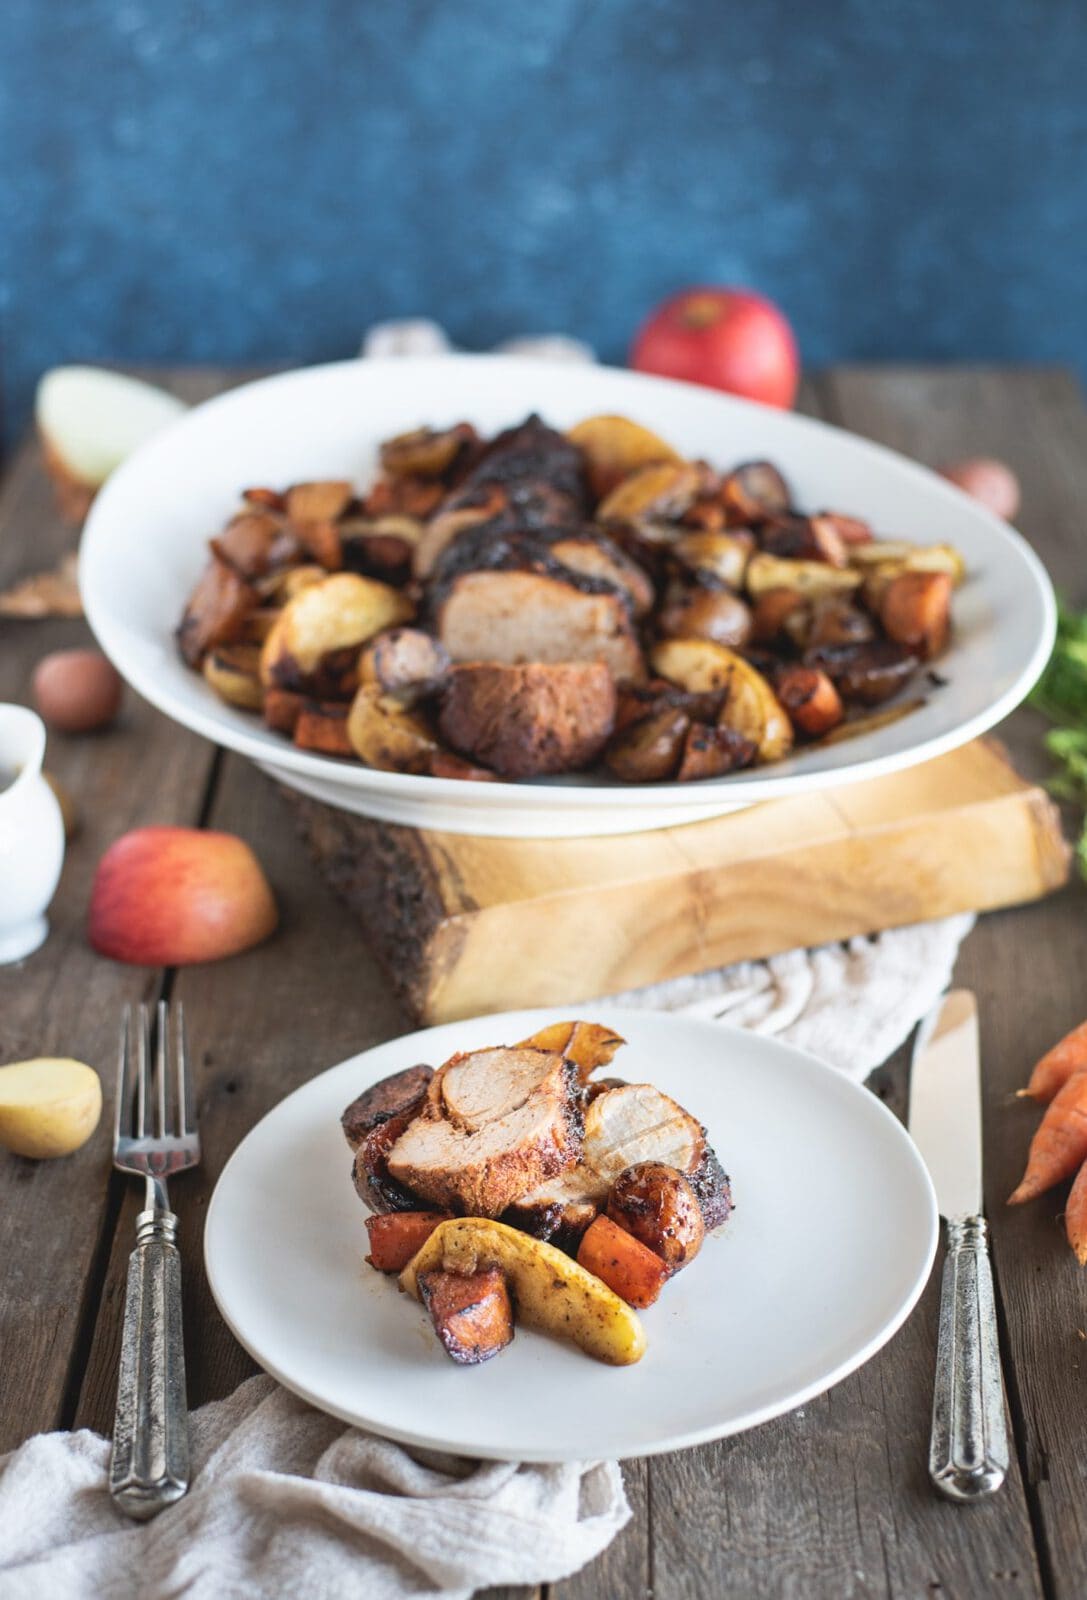 Picture of plate of Pork Tenderloin with Apples and Root Vegetables